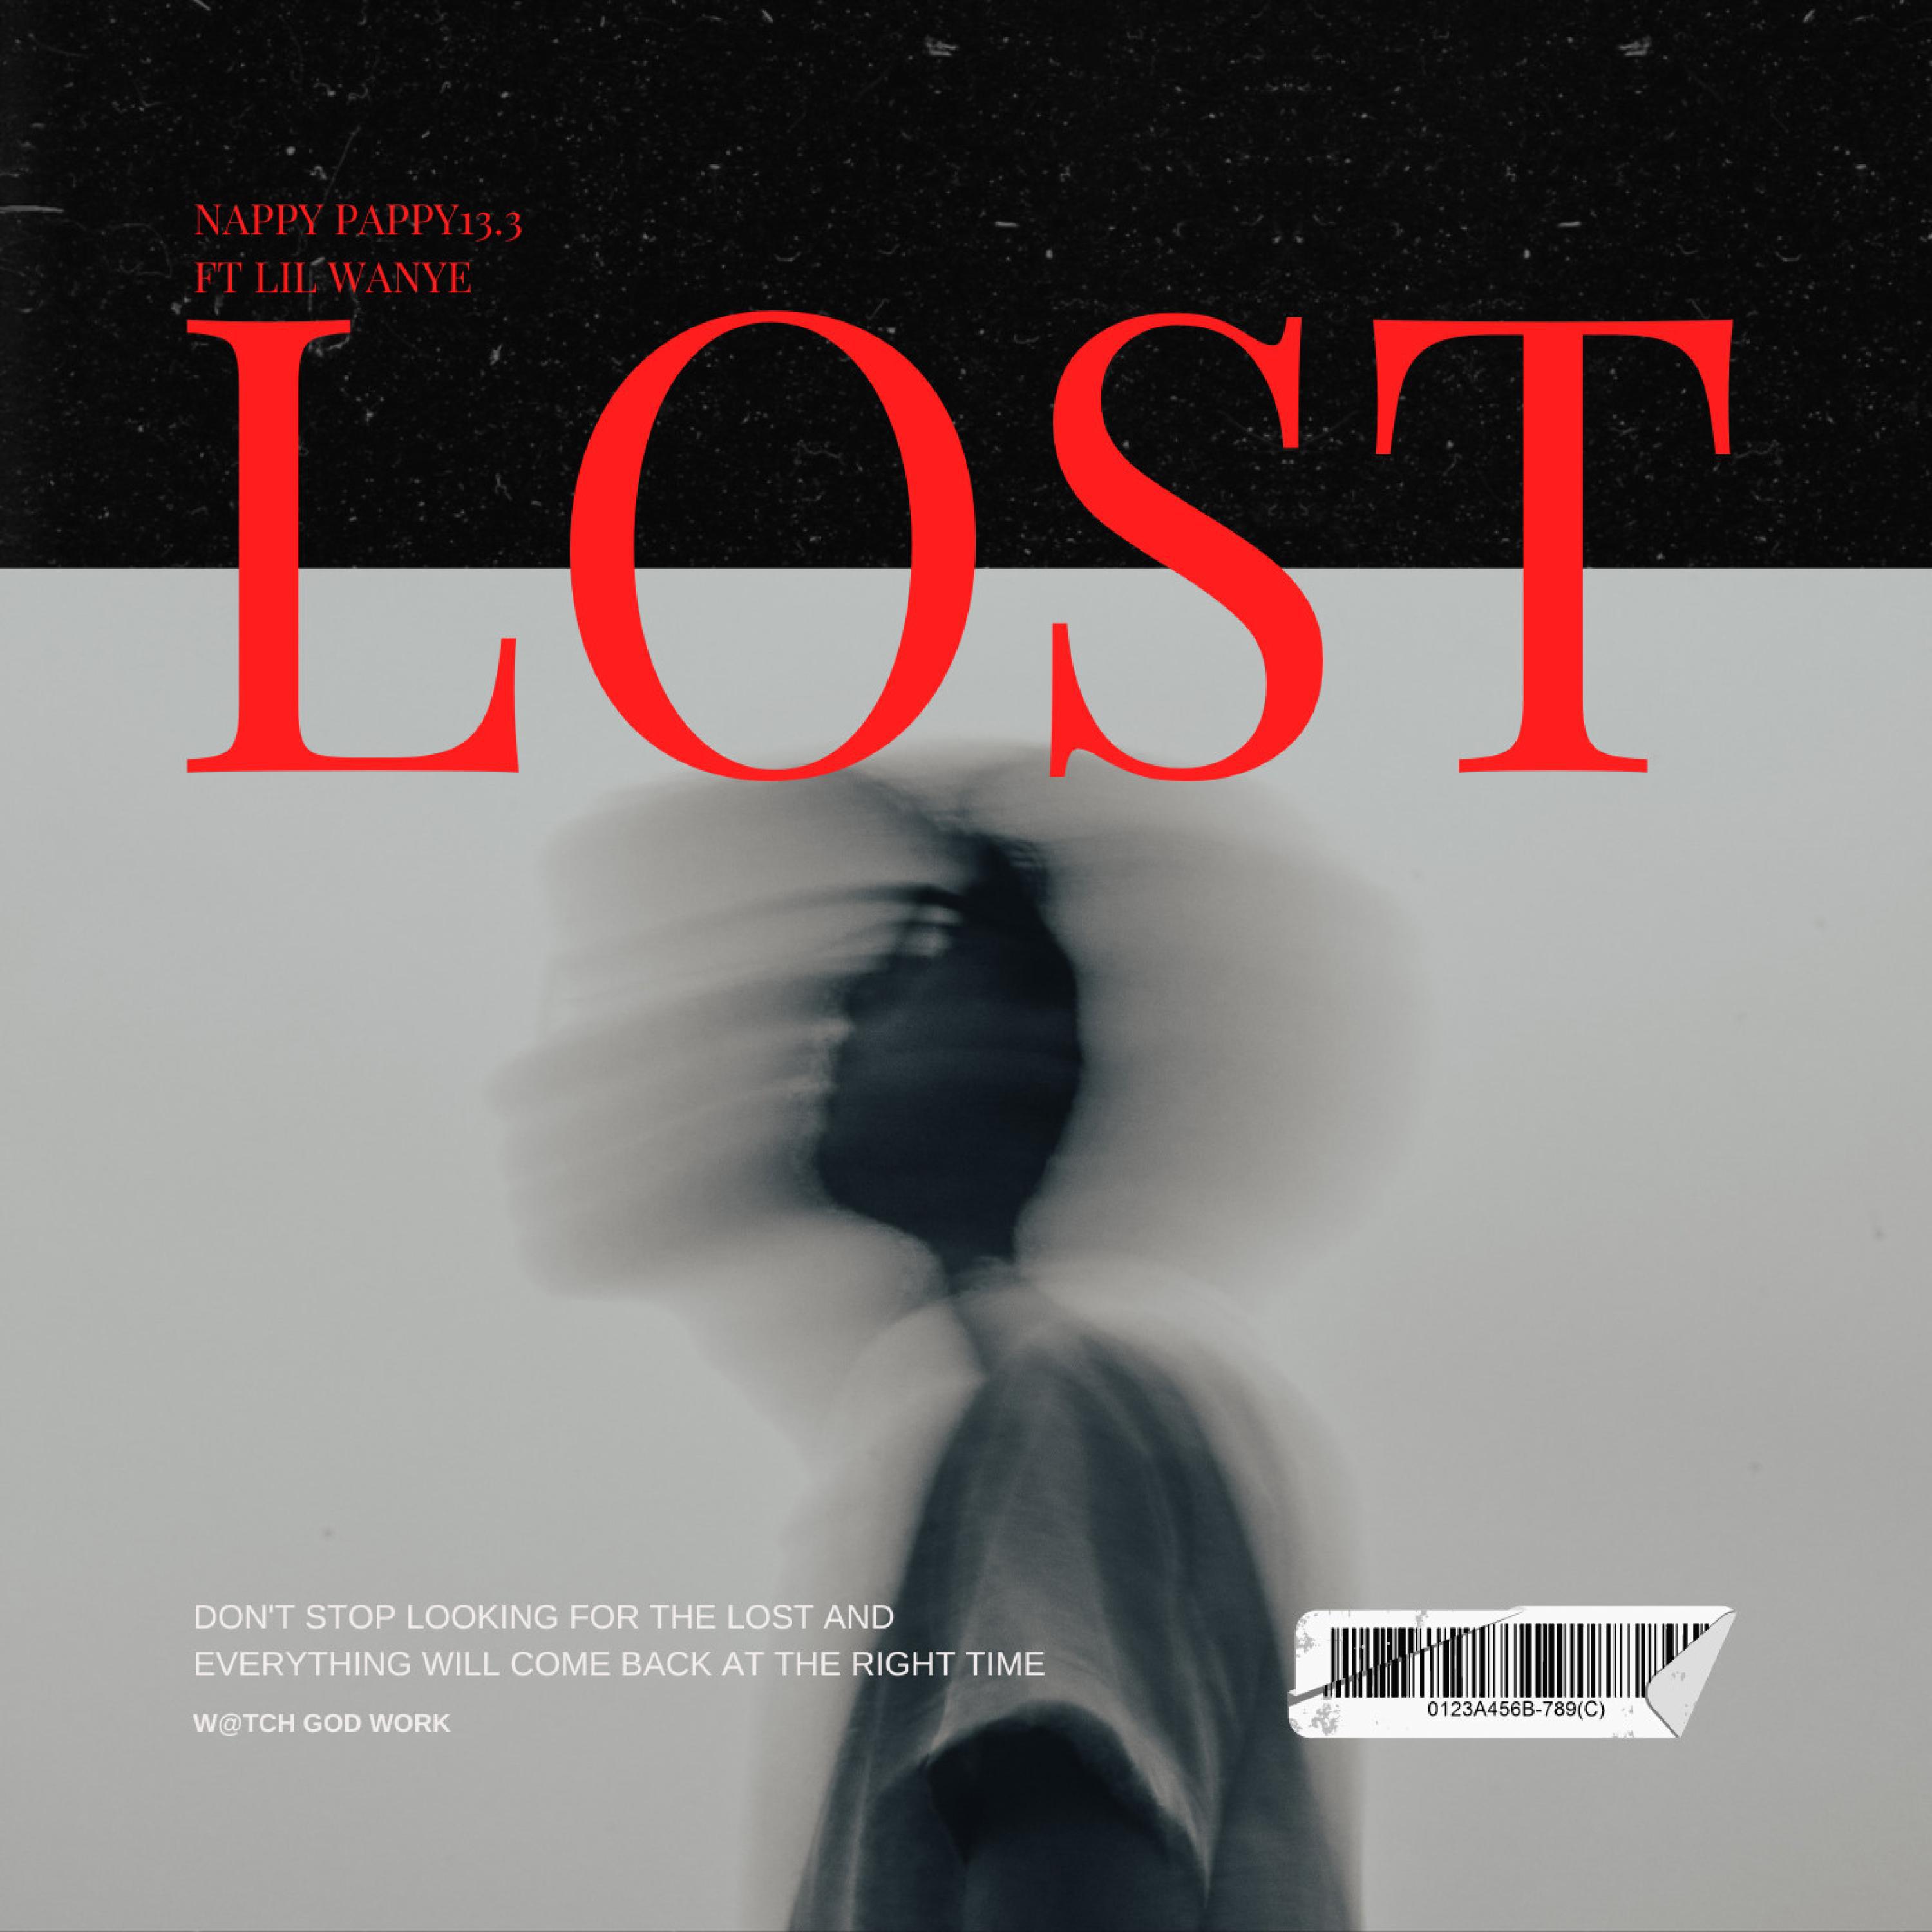 Nappy pappy13.3 - lost (feat. Lil Wayne)